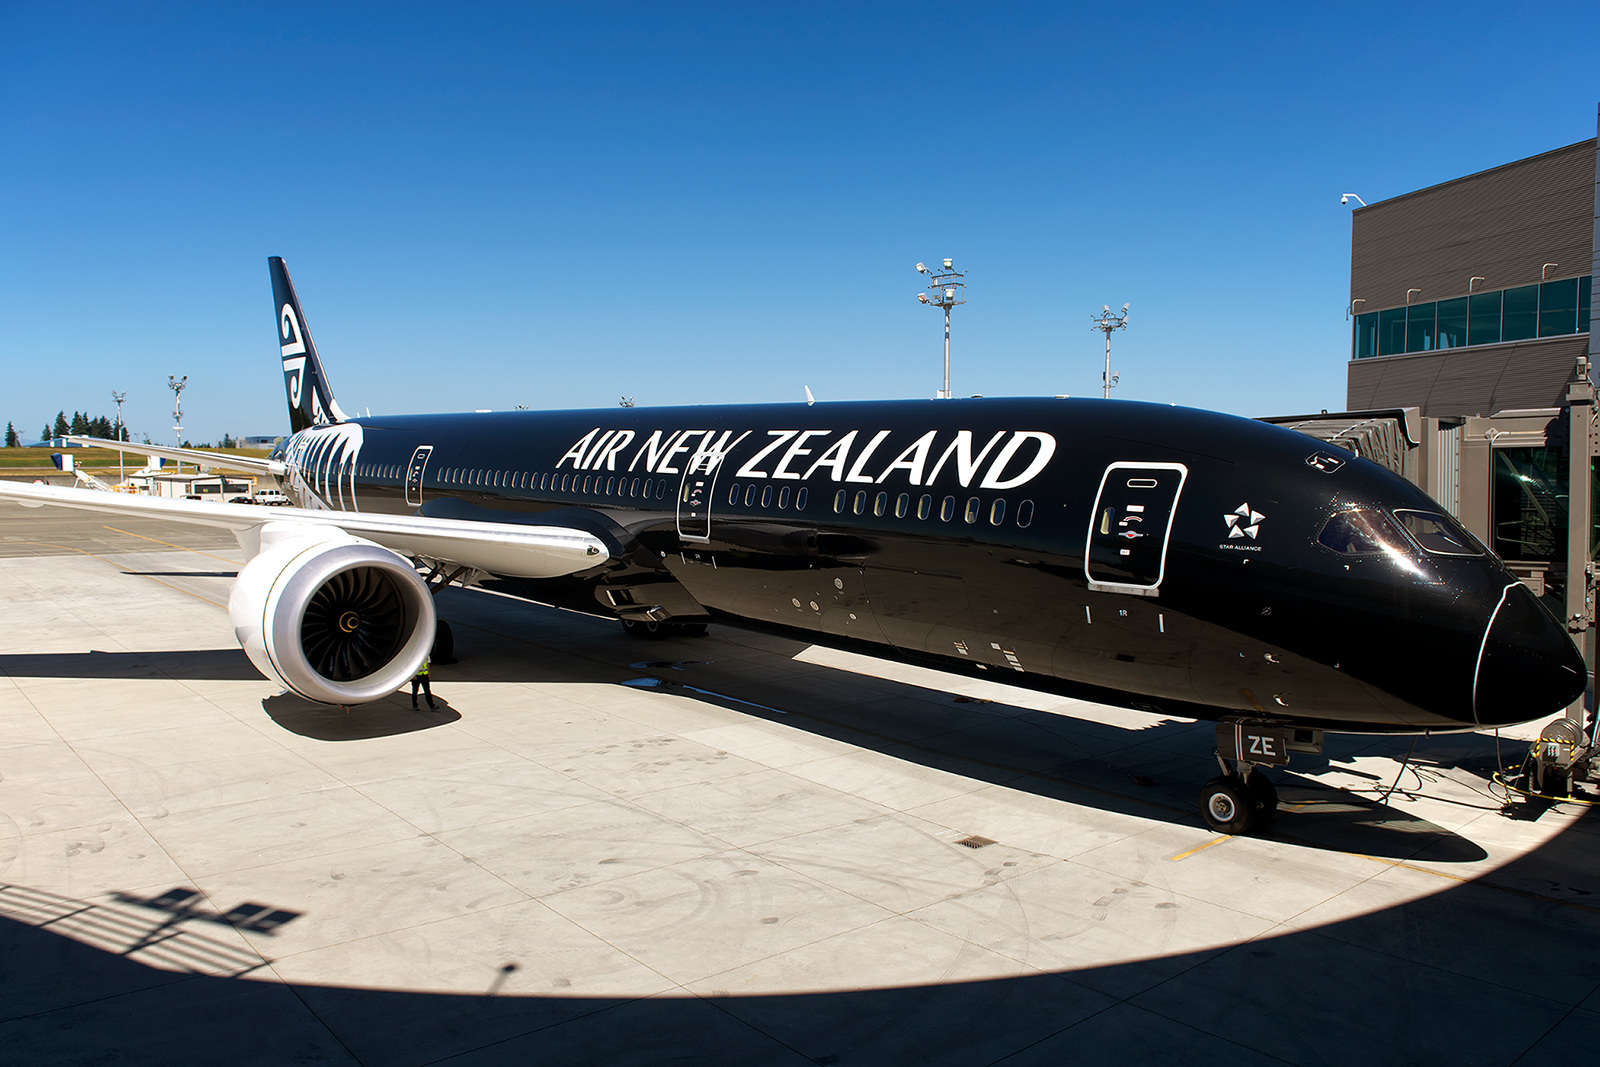 Touring Air New Zealand's Brand New Boeing 787-9 Dreamliner